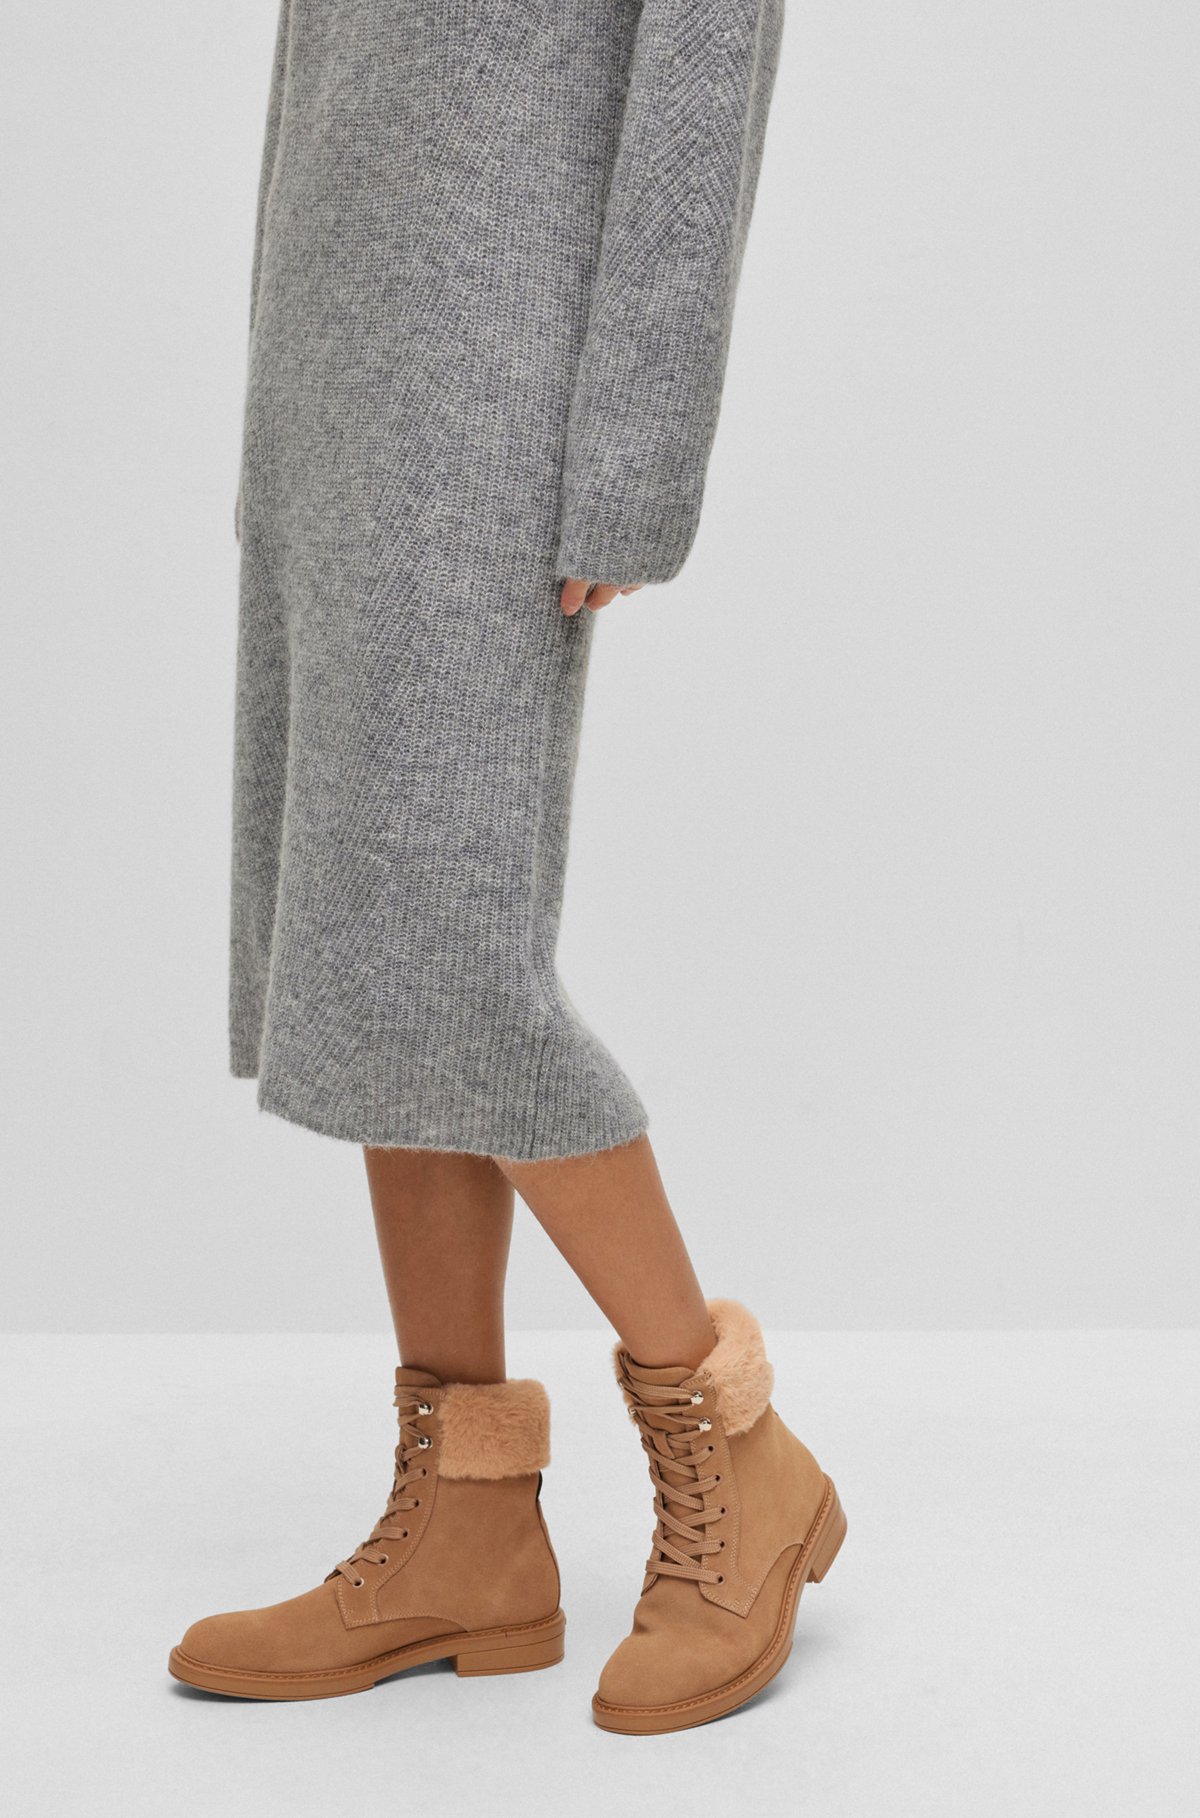 Suede lace-up boots with faux-fur collar, Beige